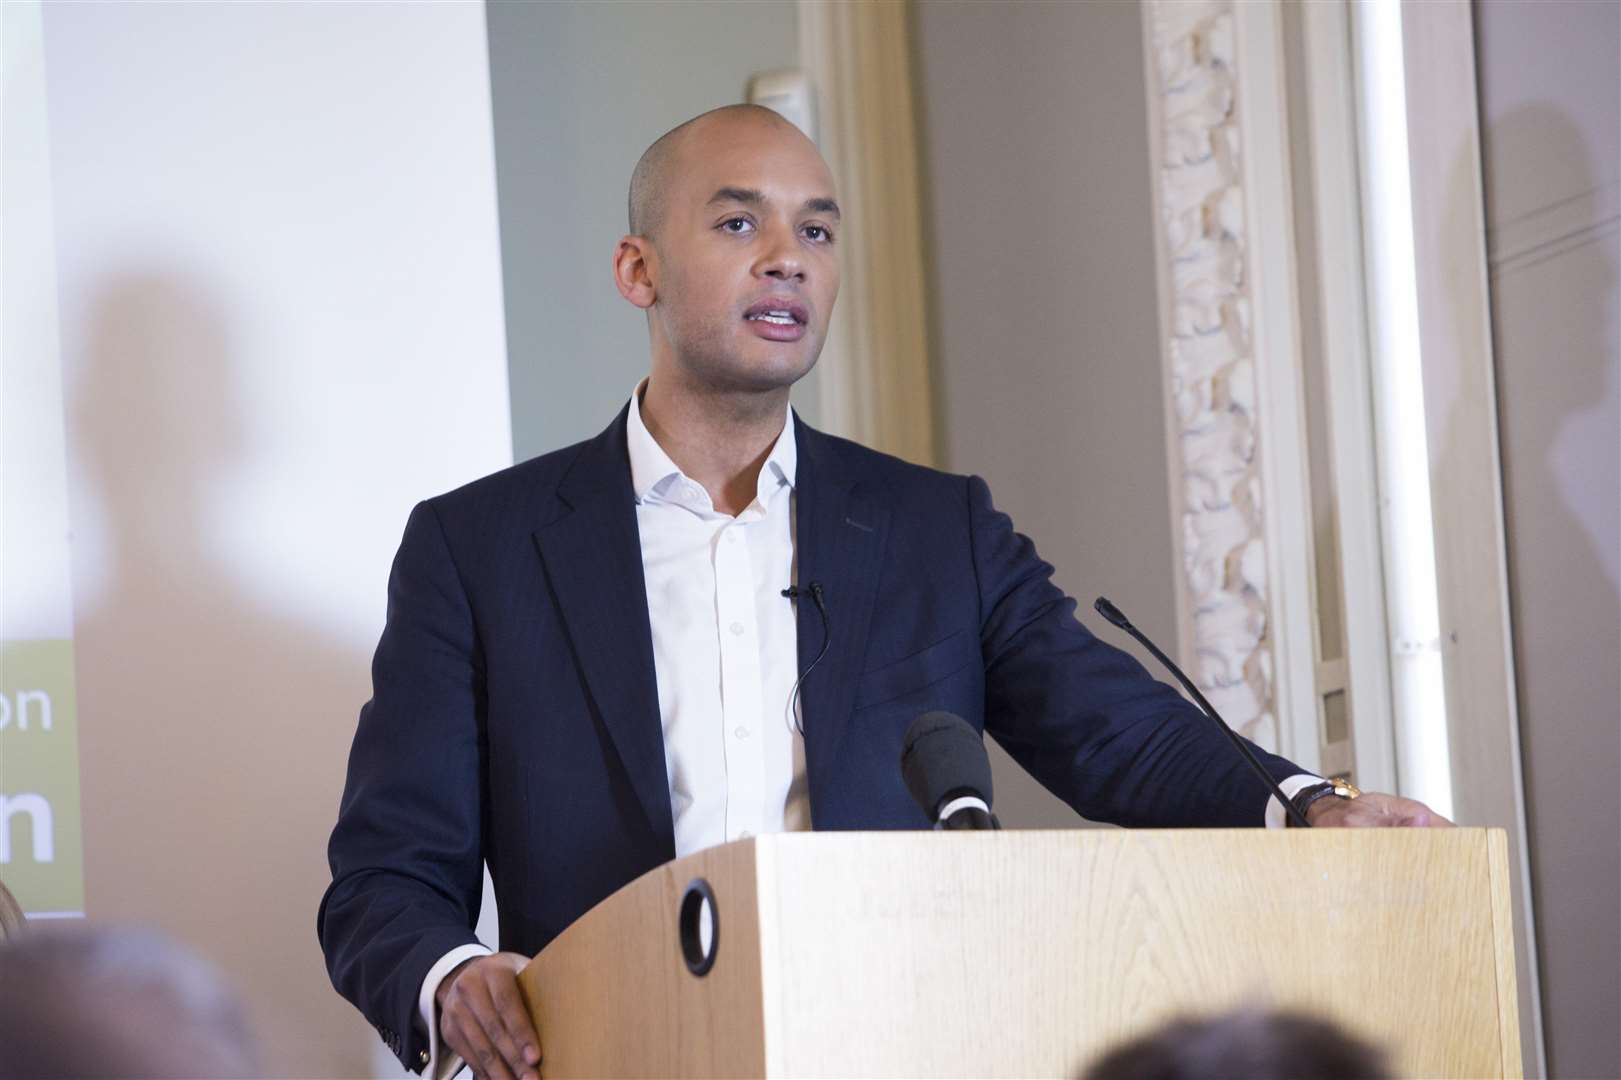 Chuka Umunna is among the MPs who have formed the independent group